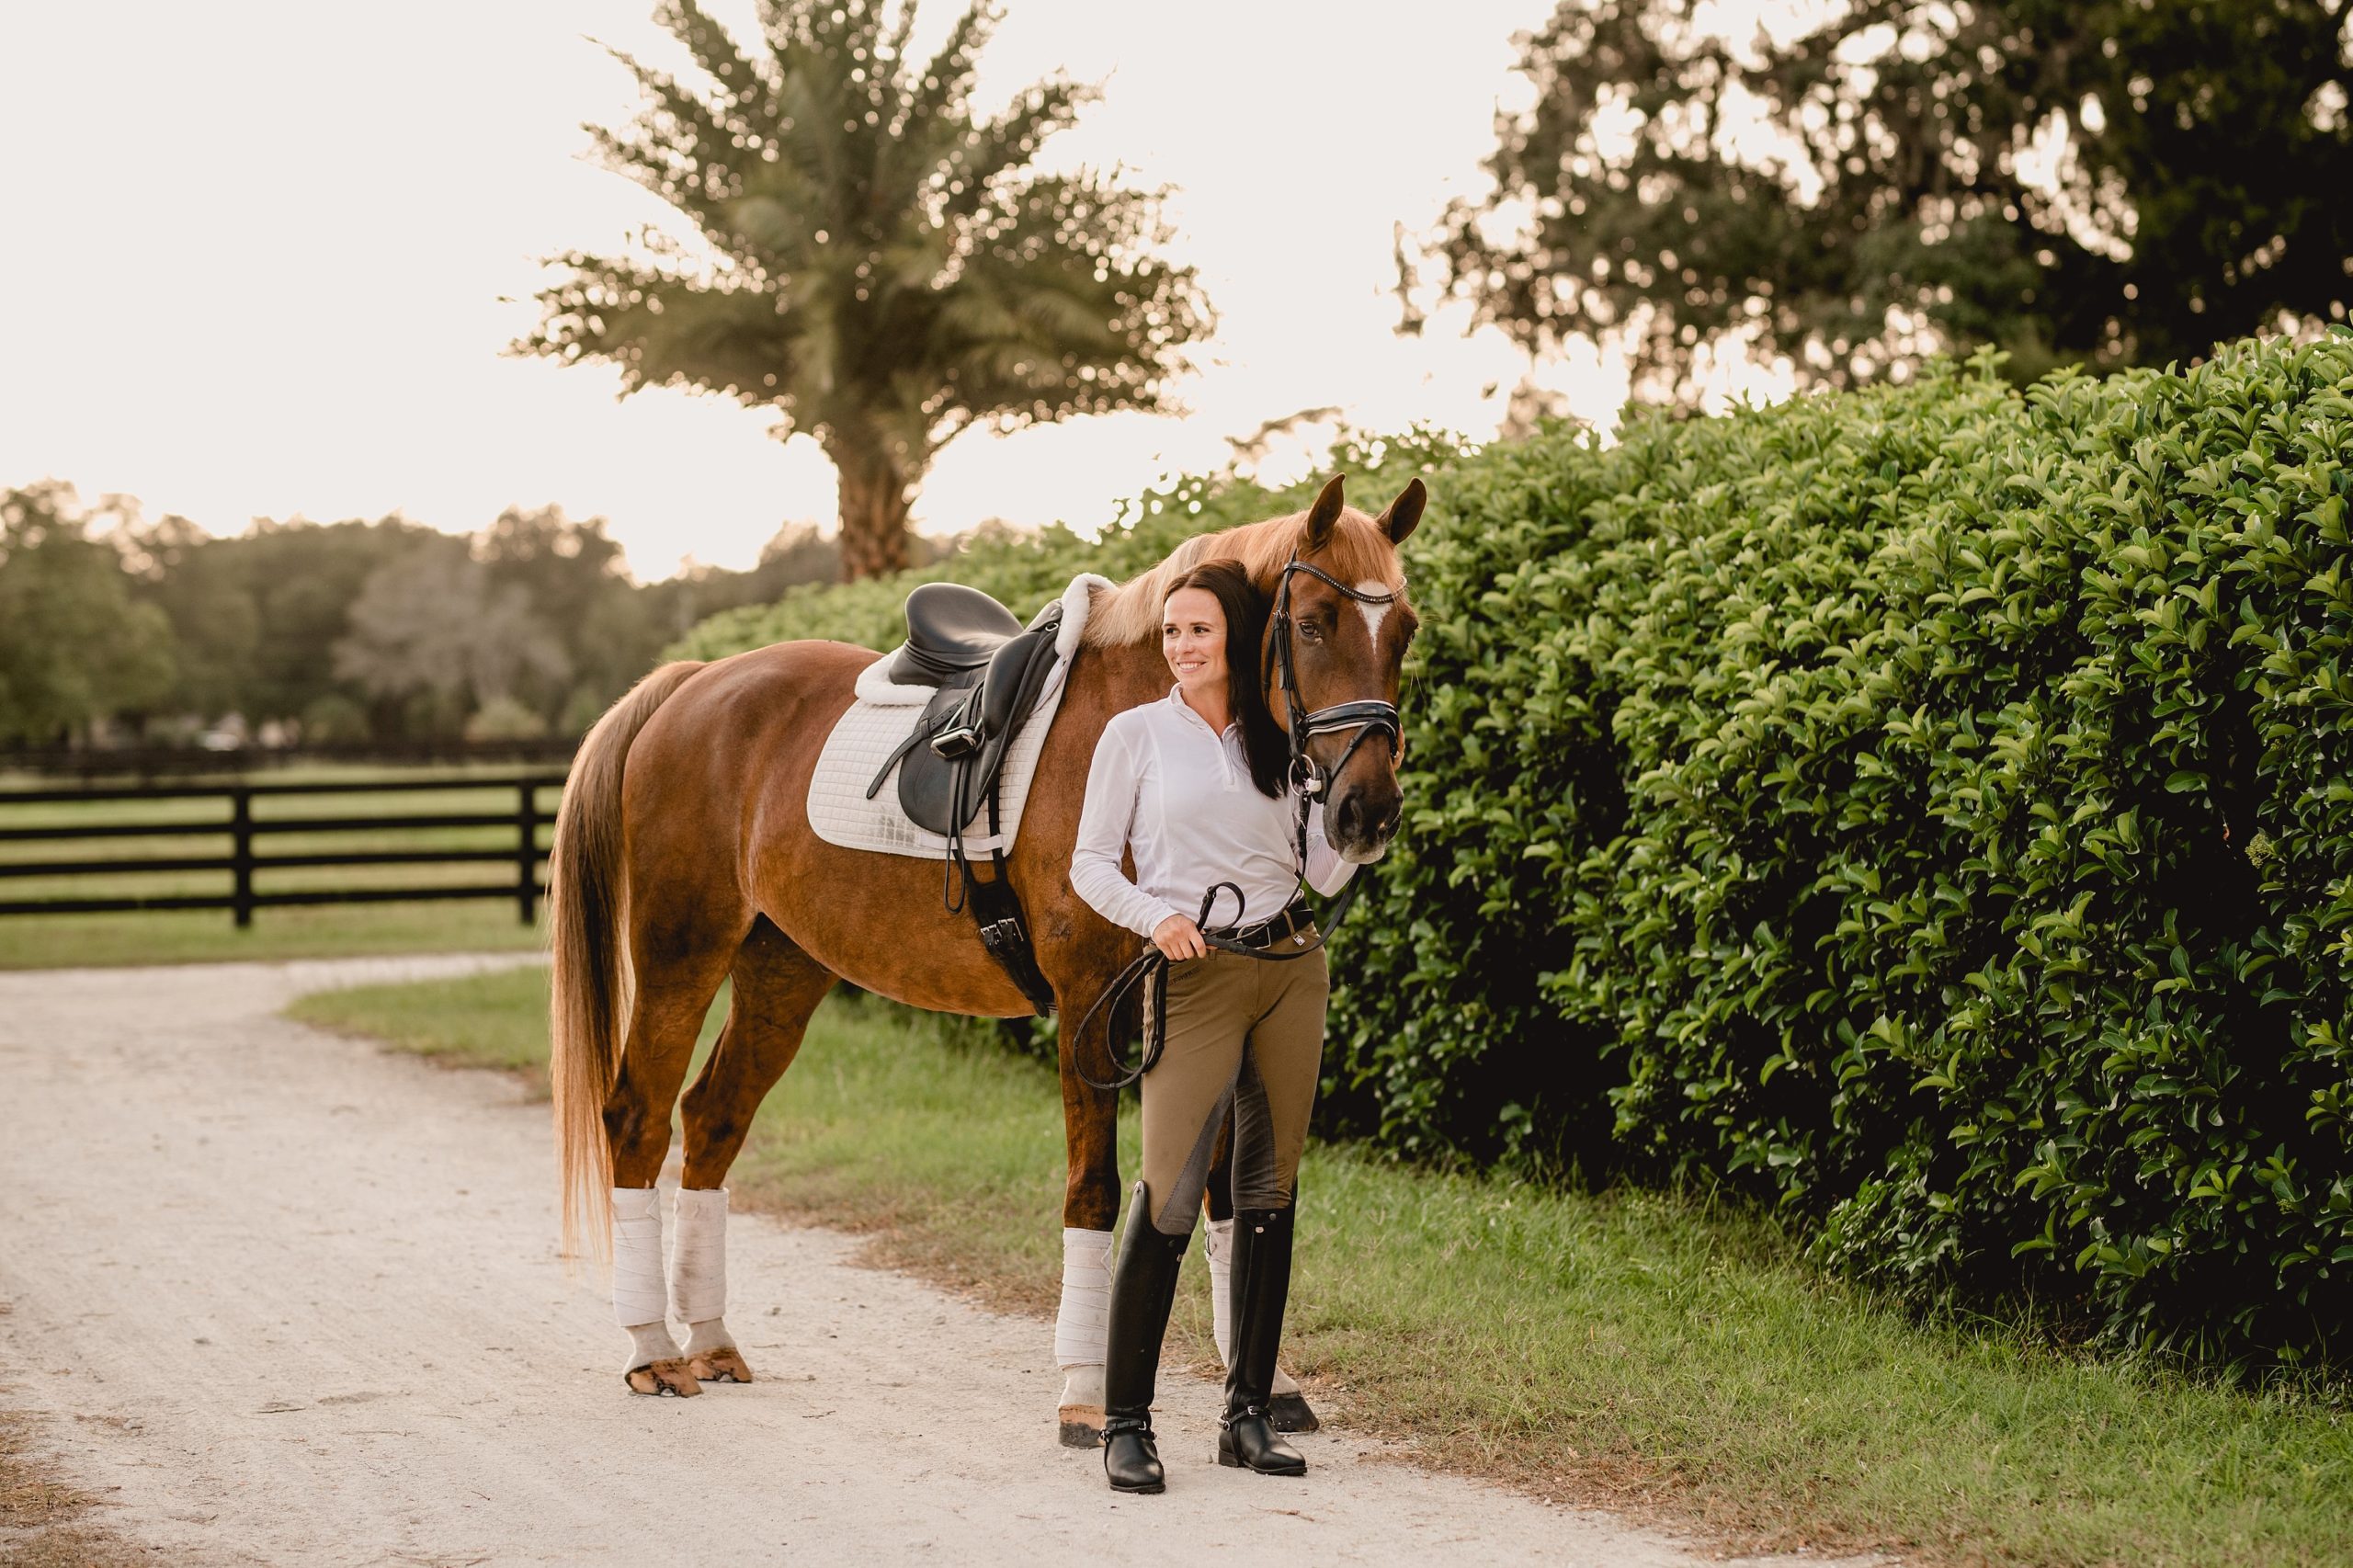 Dressage horse and rider portraits in Ocala, FL.